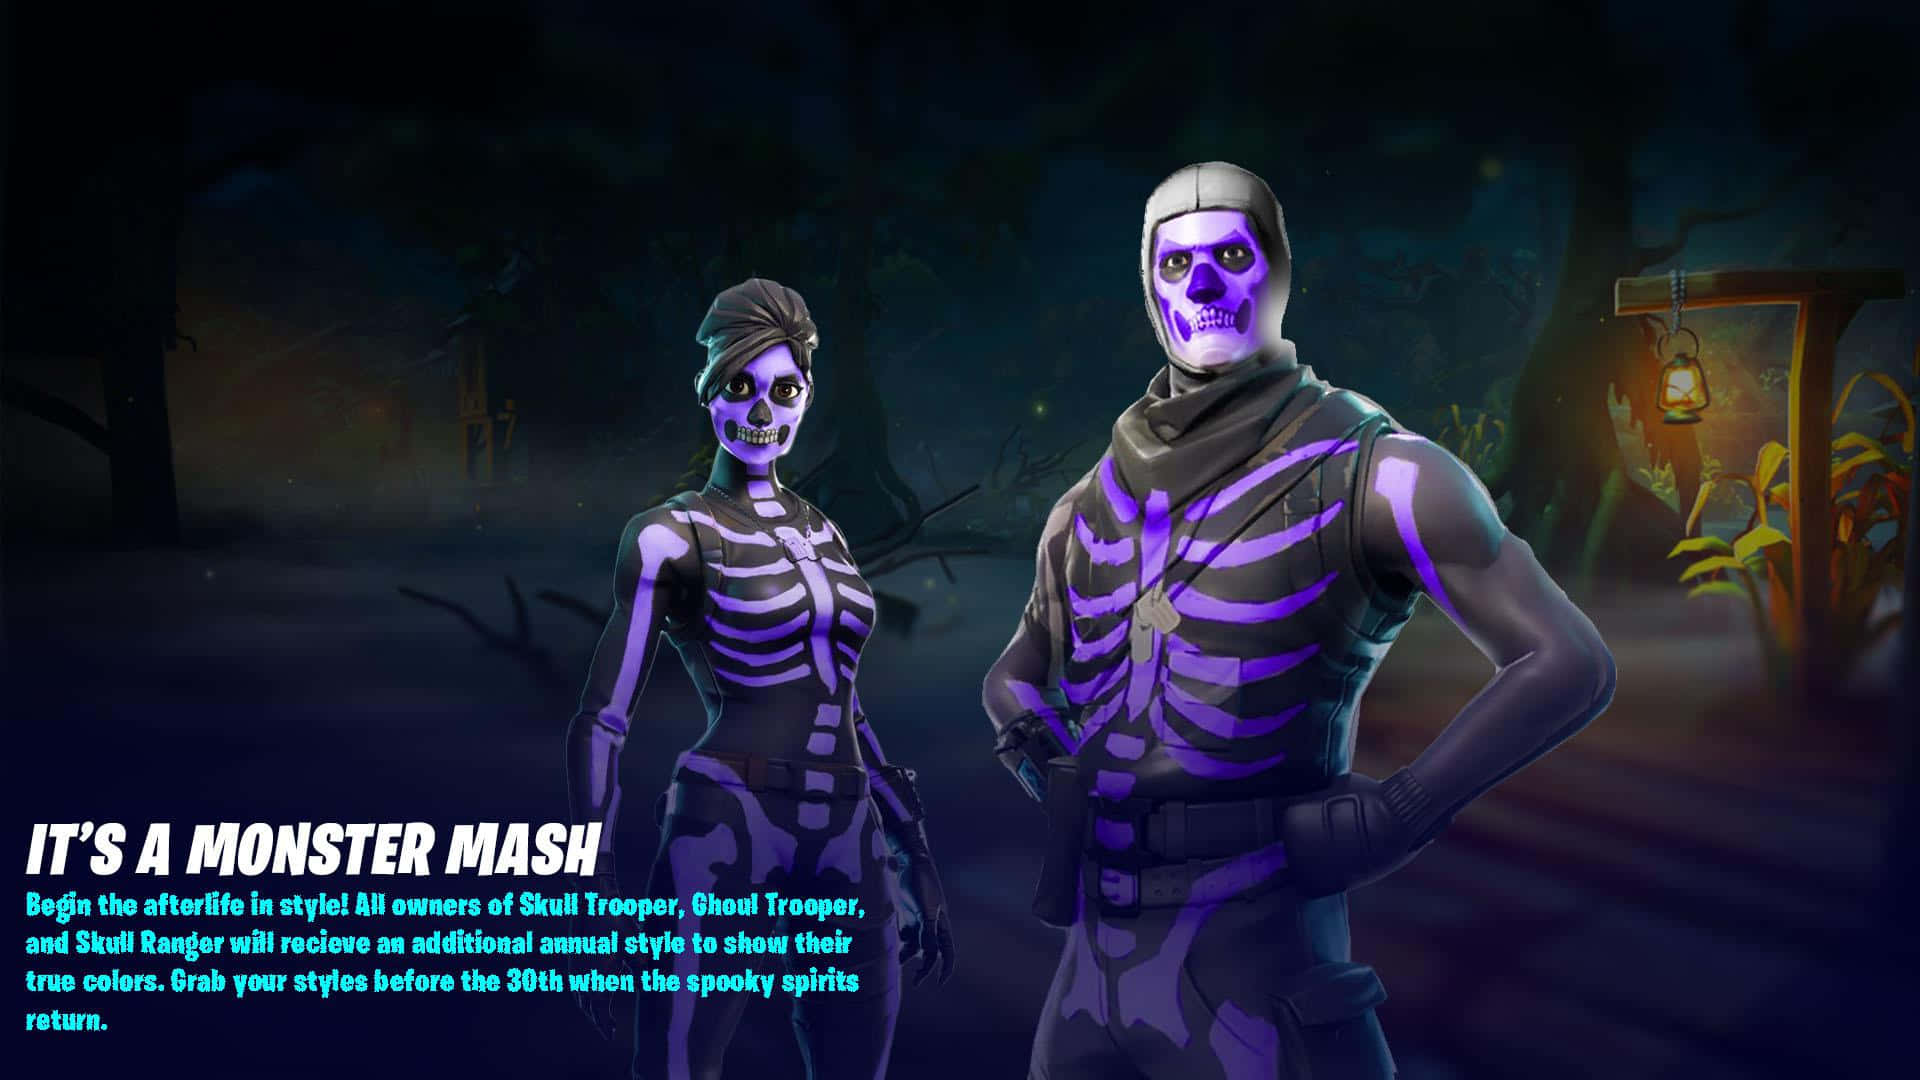 Step into the world of the supernatural with Purple Skull Trooper! Wallpaper